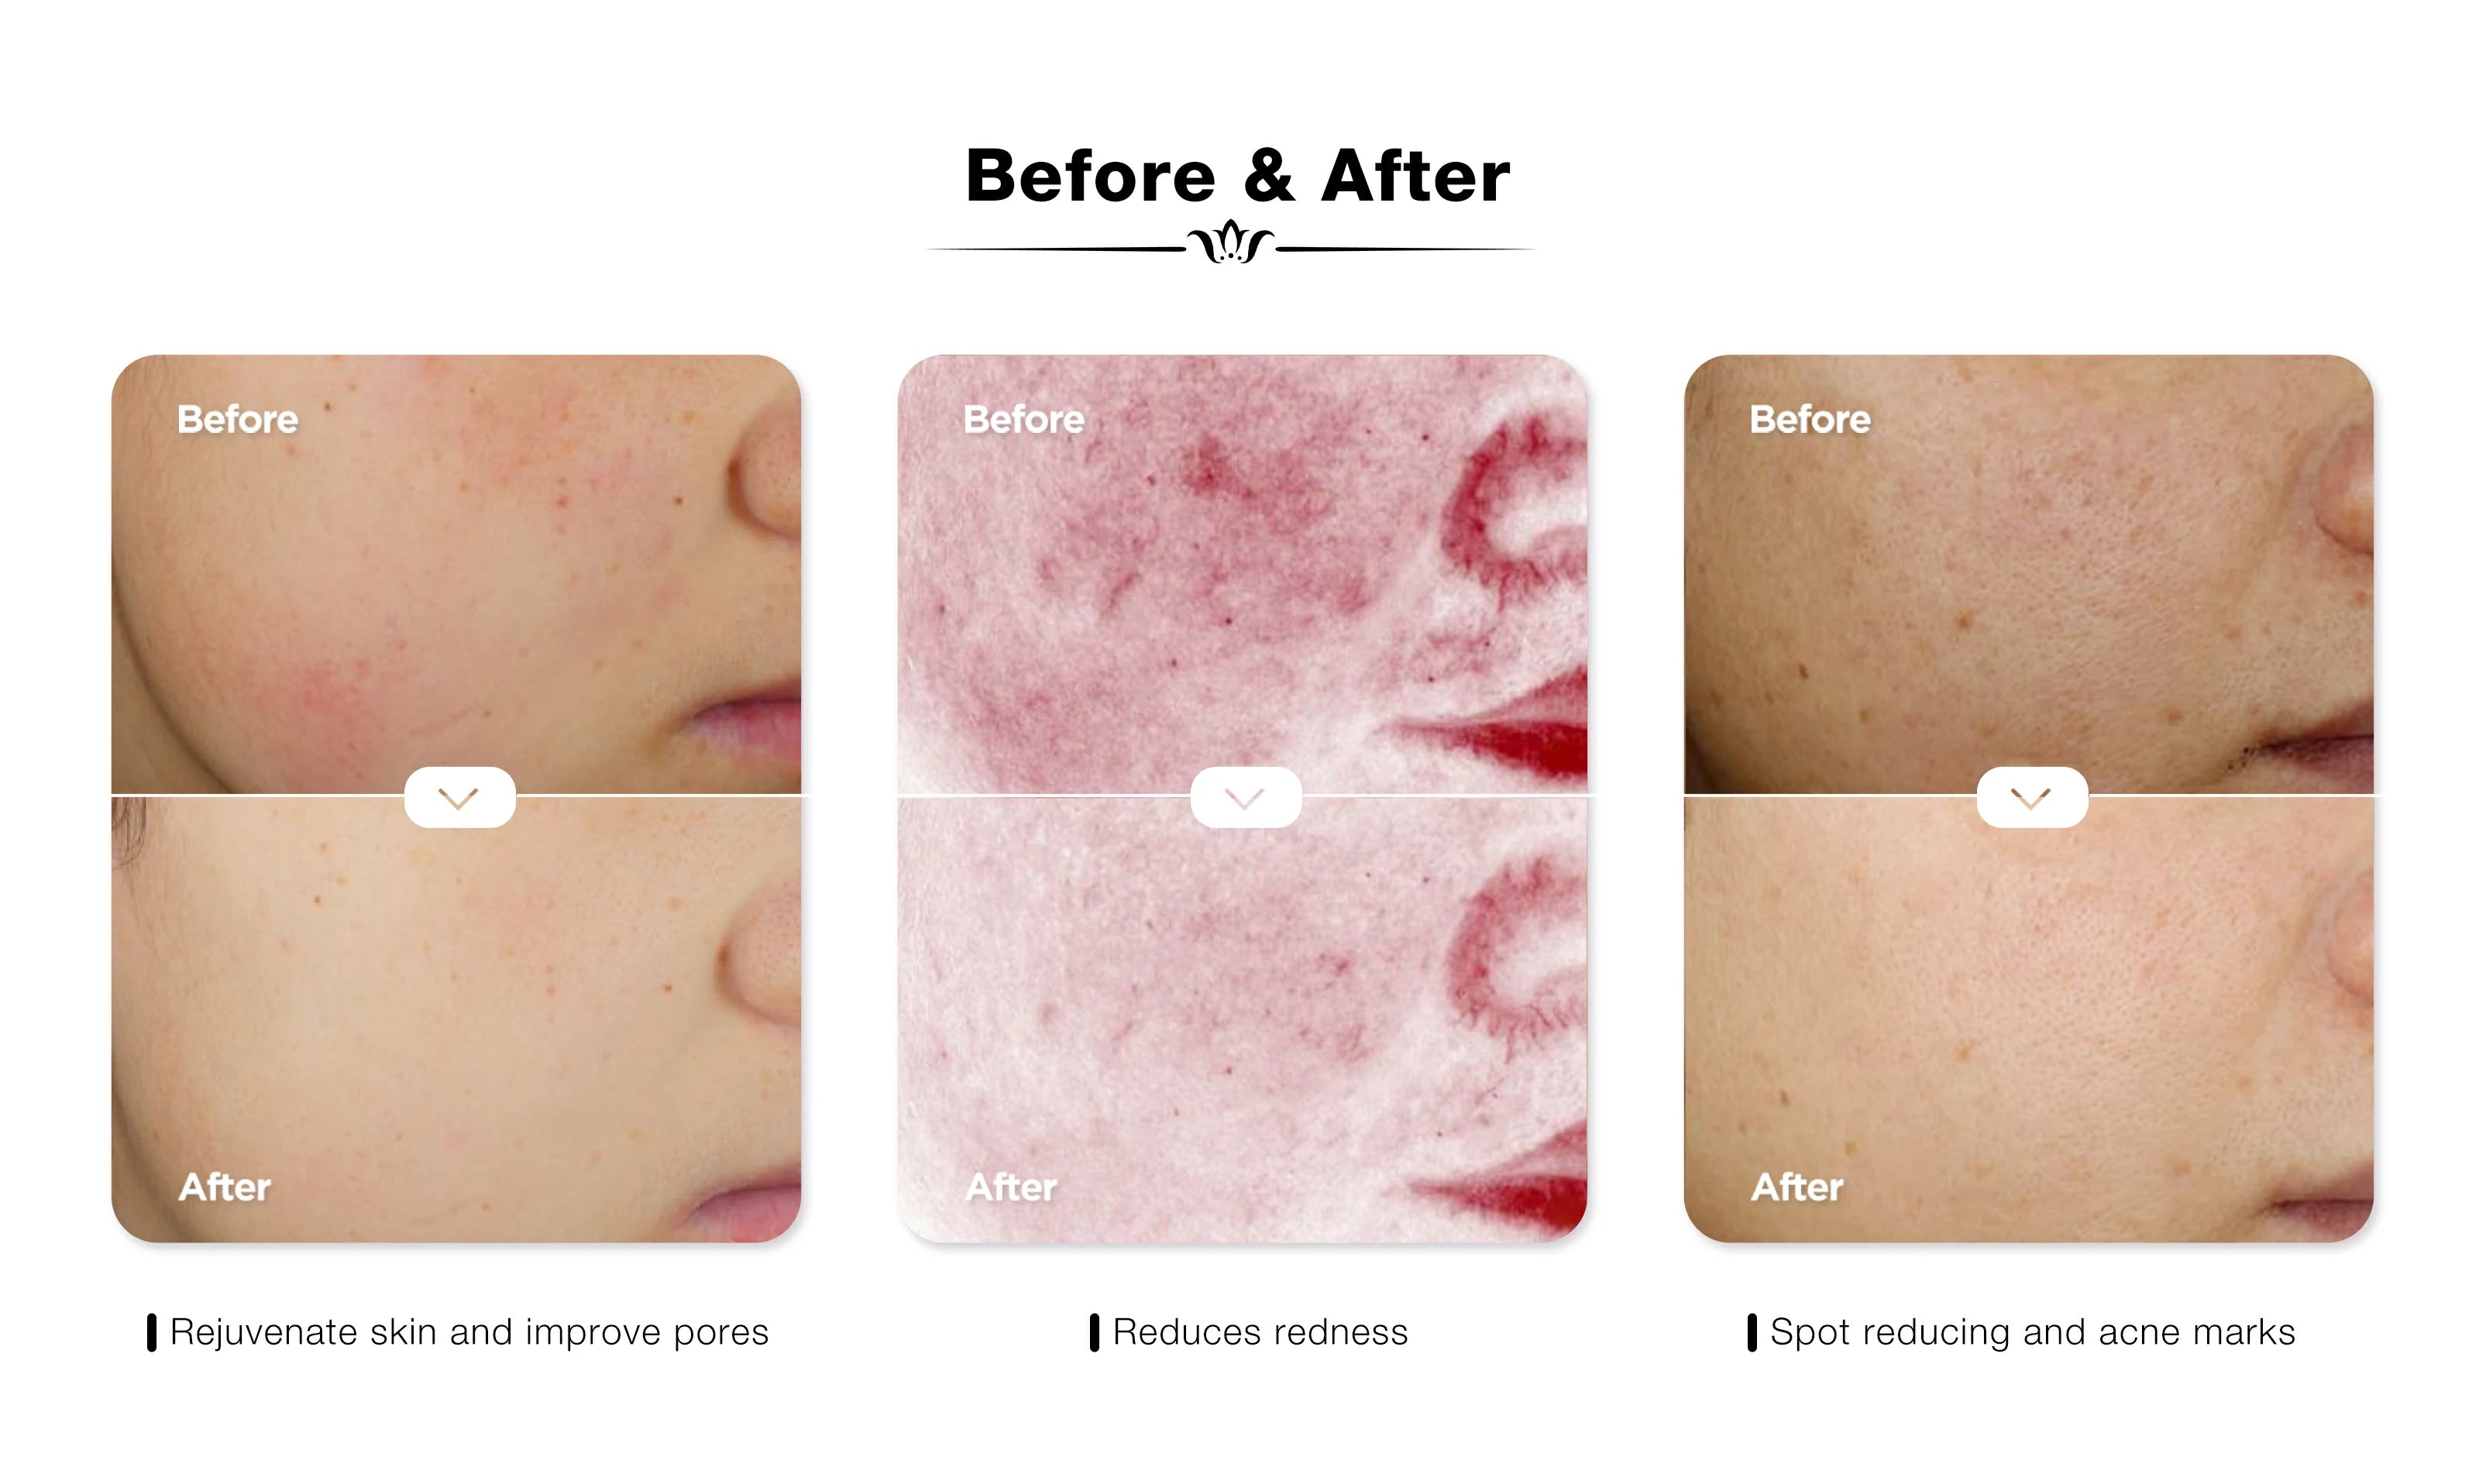 Before and after results using JOVS Blacken DPL Photofacial Skincare Device showing rejuvenated skin, reduced redness, and diminished acne marks.